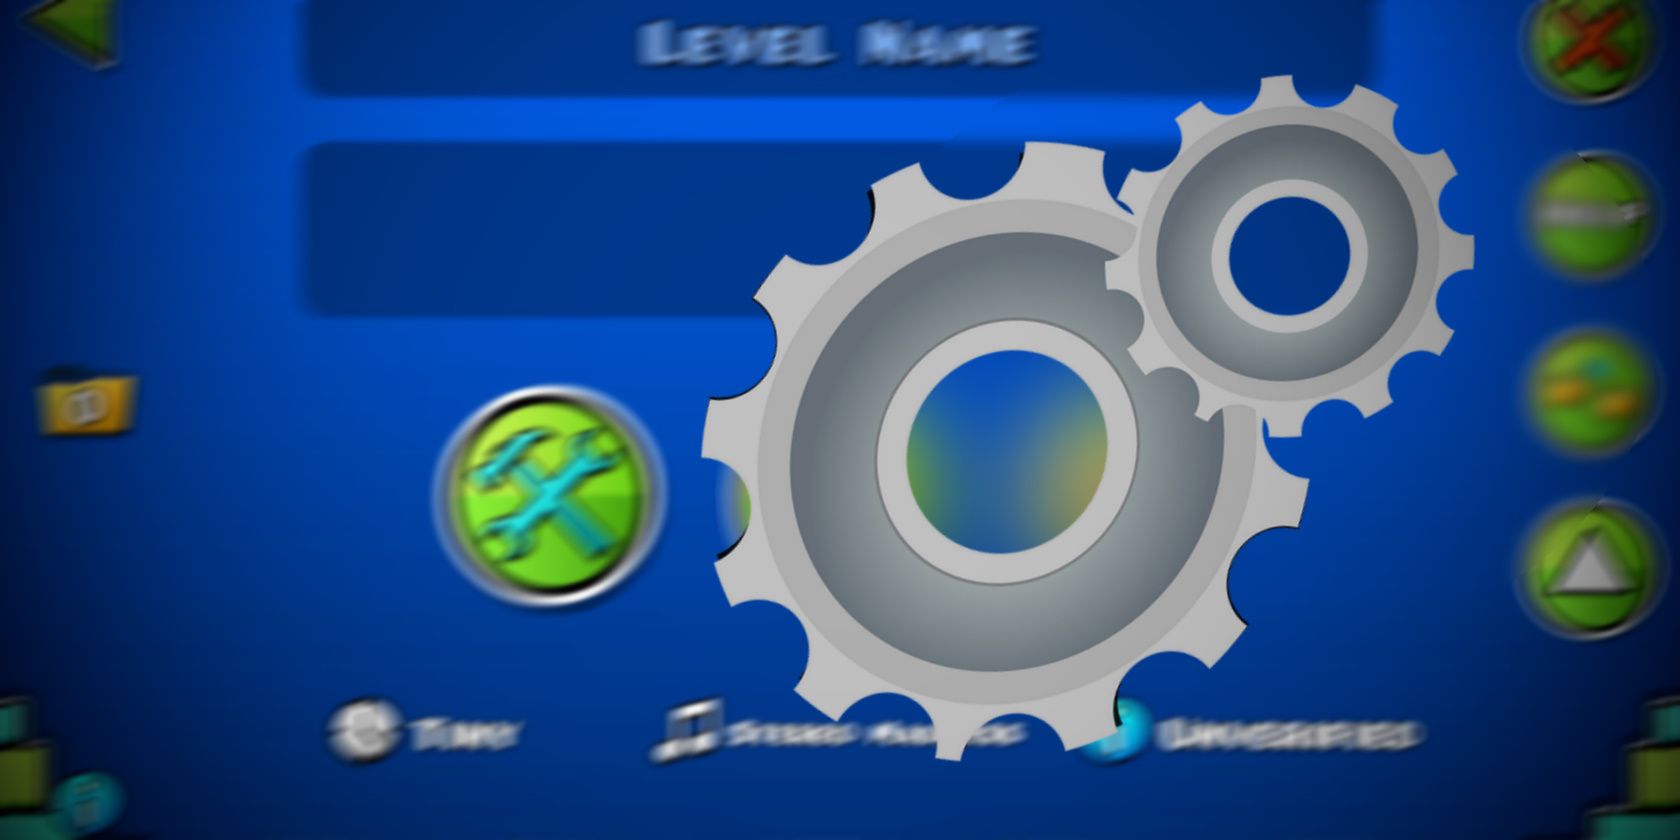 Level Editor in Geometry Dash With Editing Cogs